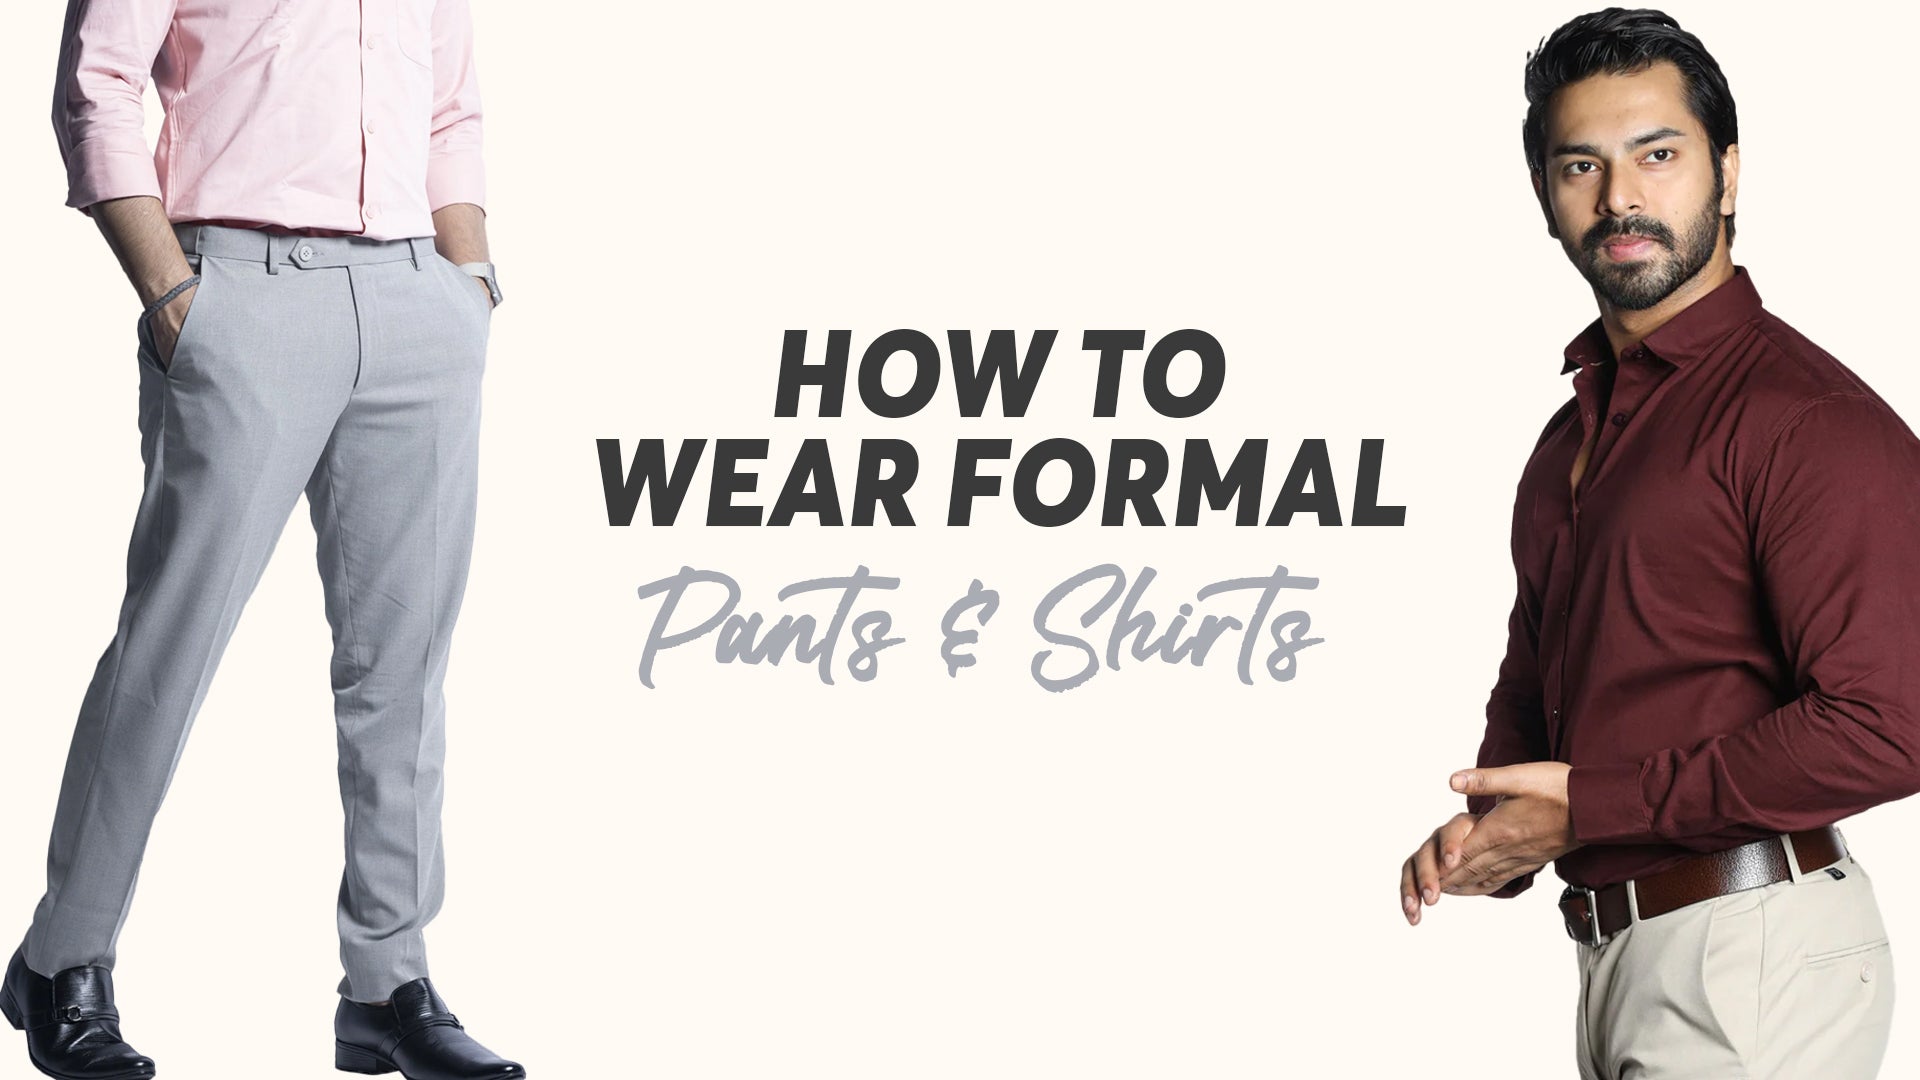 How to Wear a Formal Shirt and Pant?